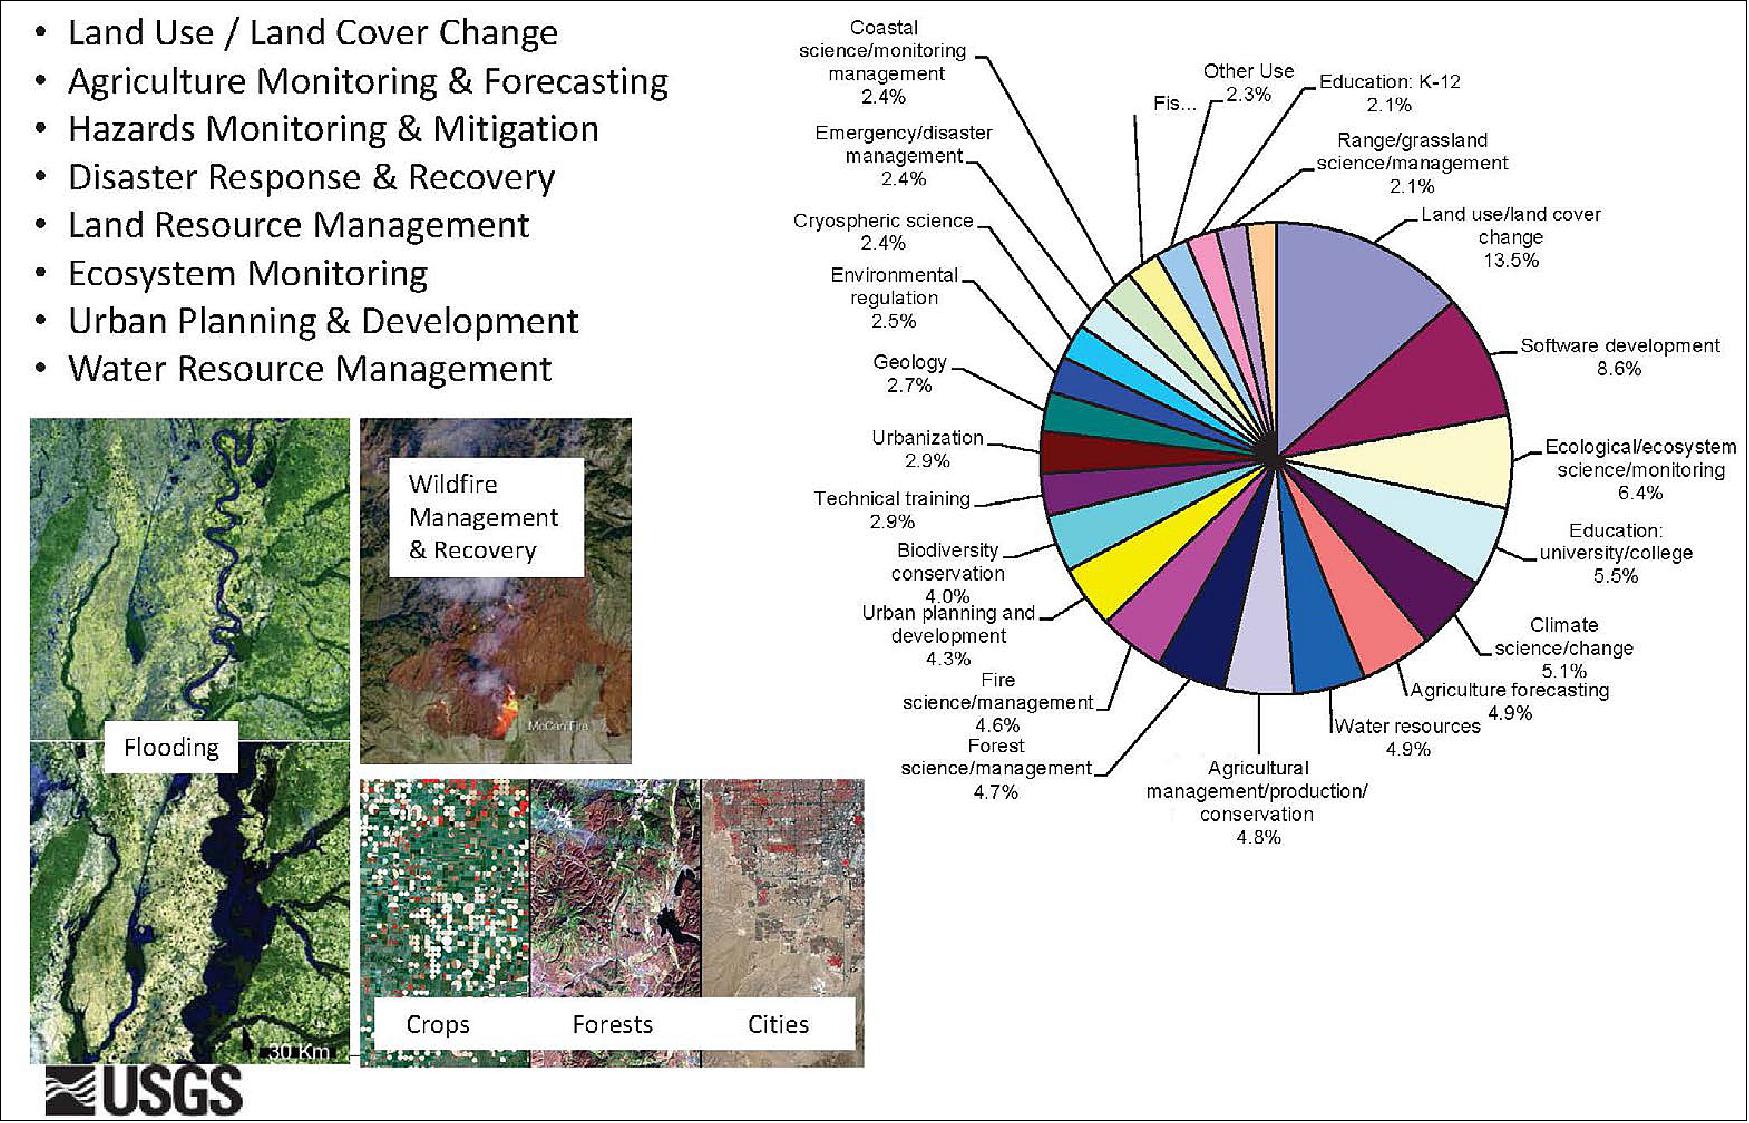 Figure 18: Demand for Landsat data comes from a wide range of interested communities and stakeholders, from the largest group (land use/land cover change) to the smallest (range/grassland science and management), image credit: USGS